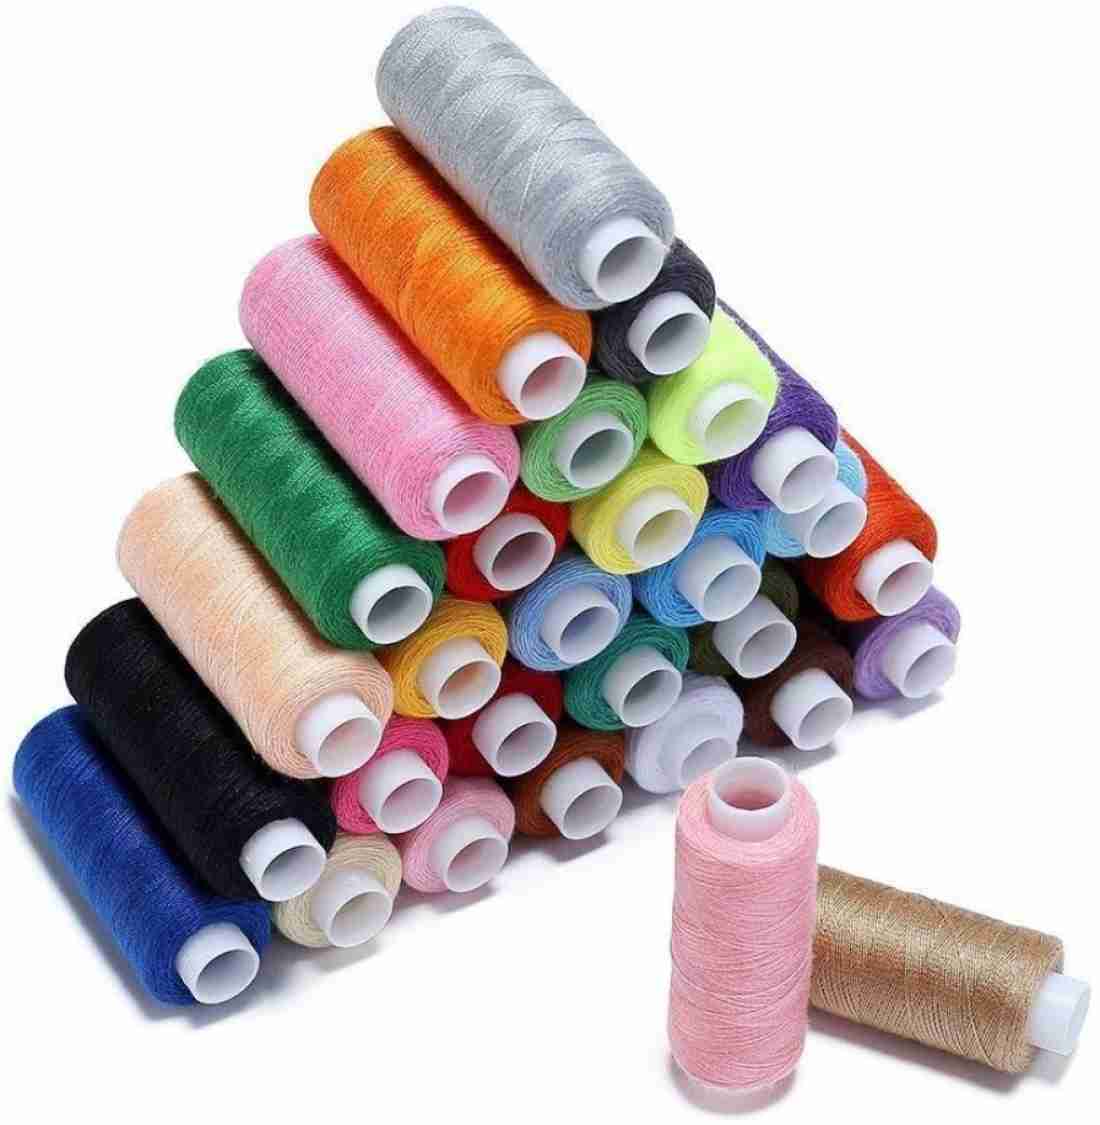 30 Assorted Colour Polyester Sewing Thread Spools 250 Yards Each